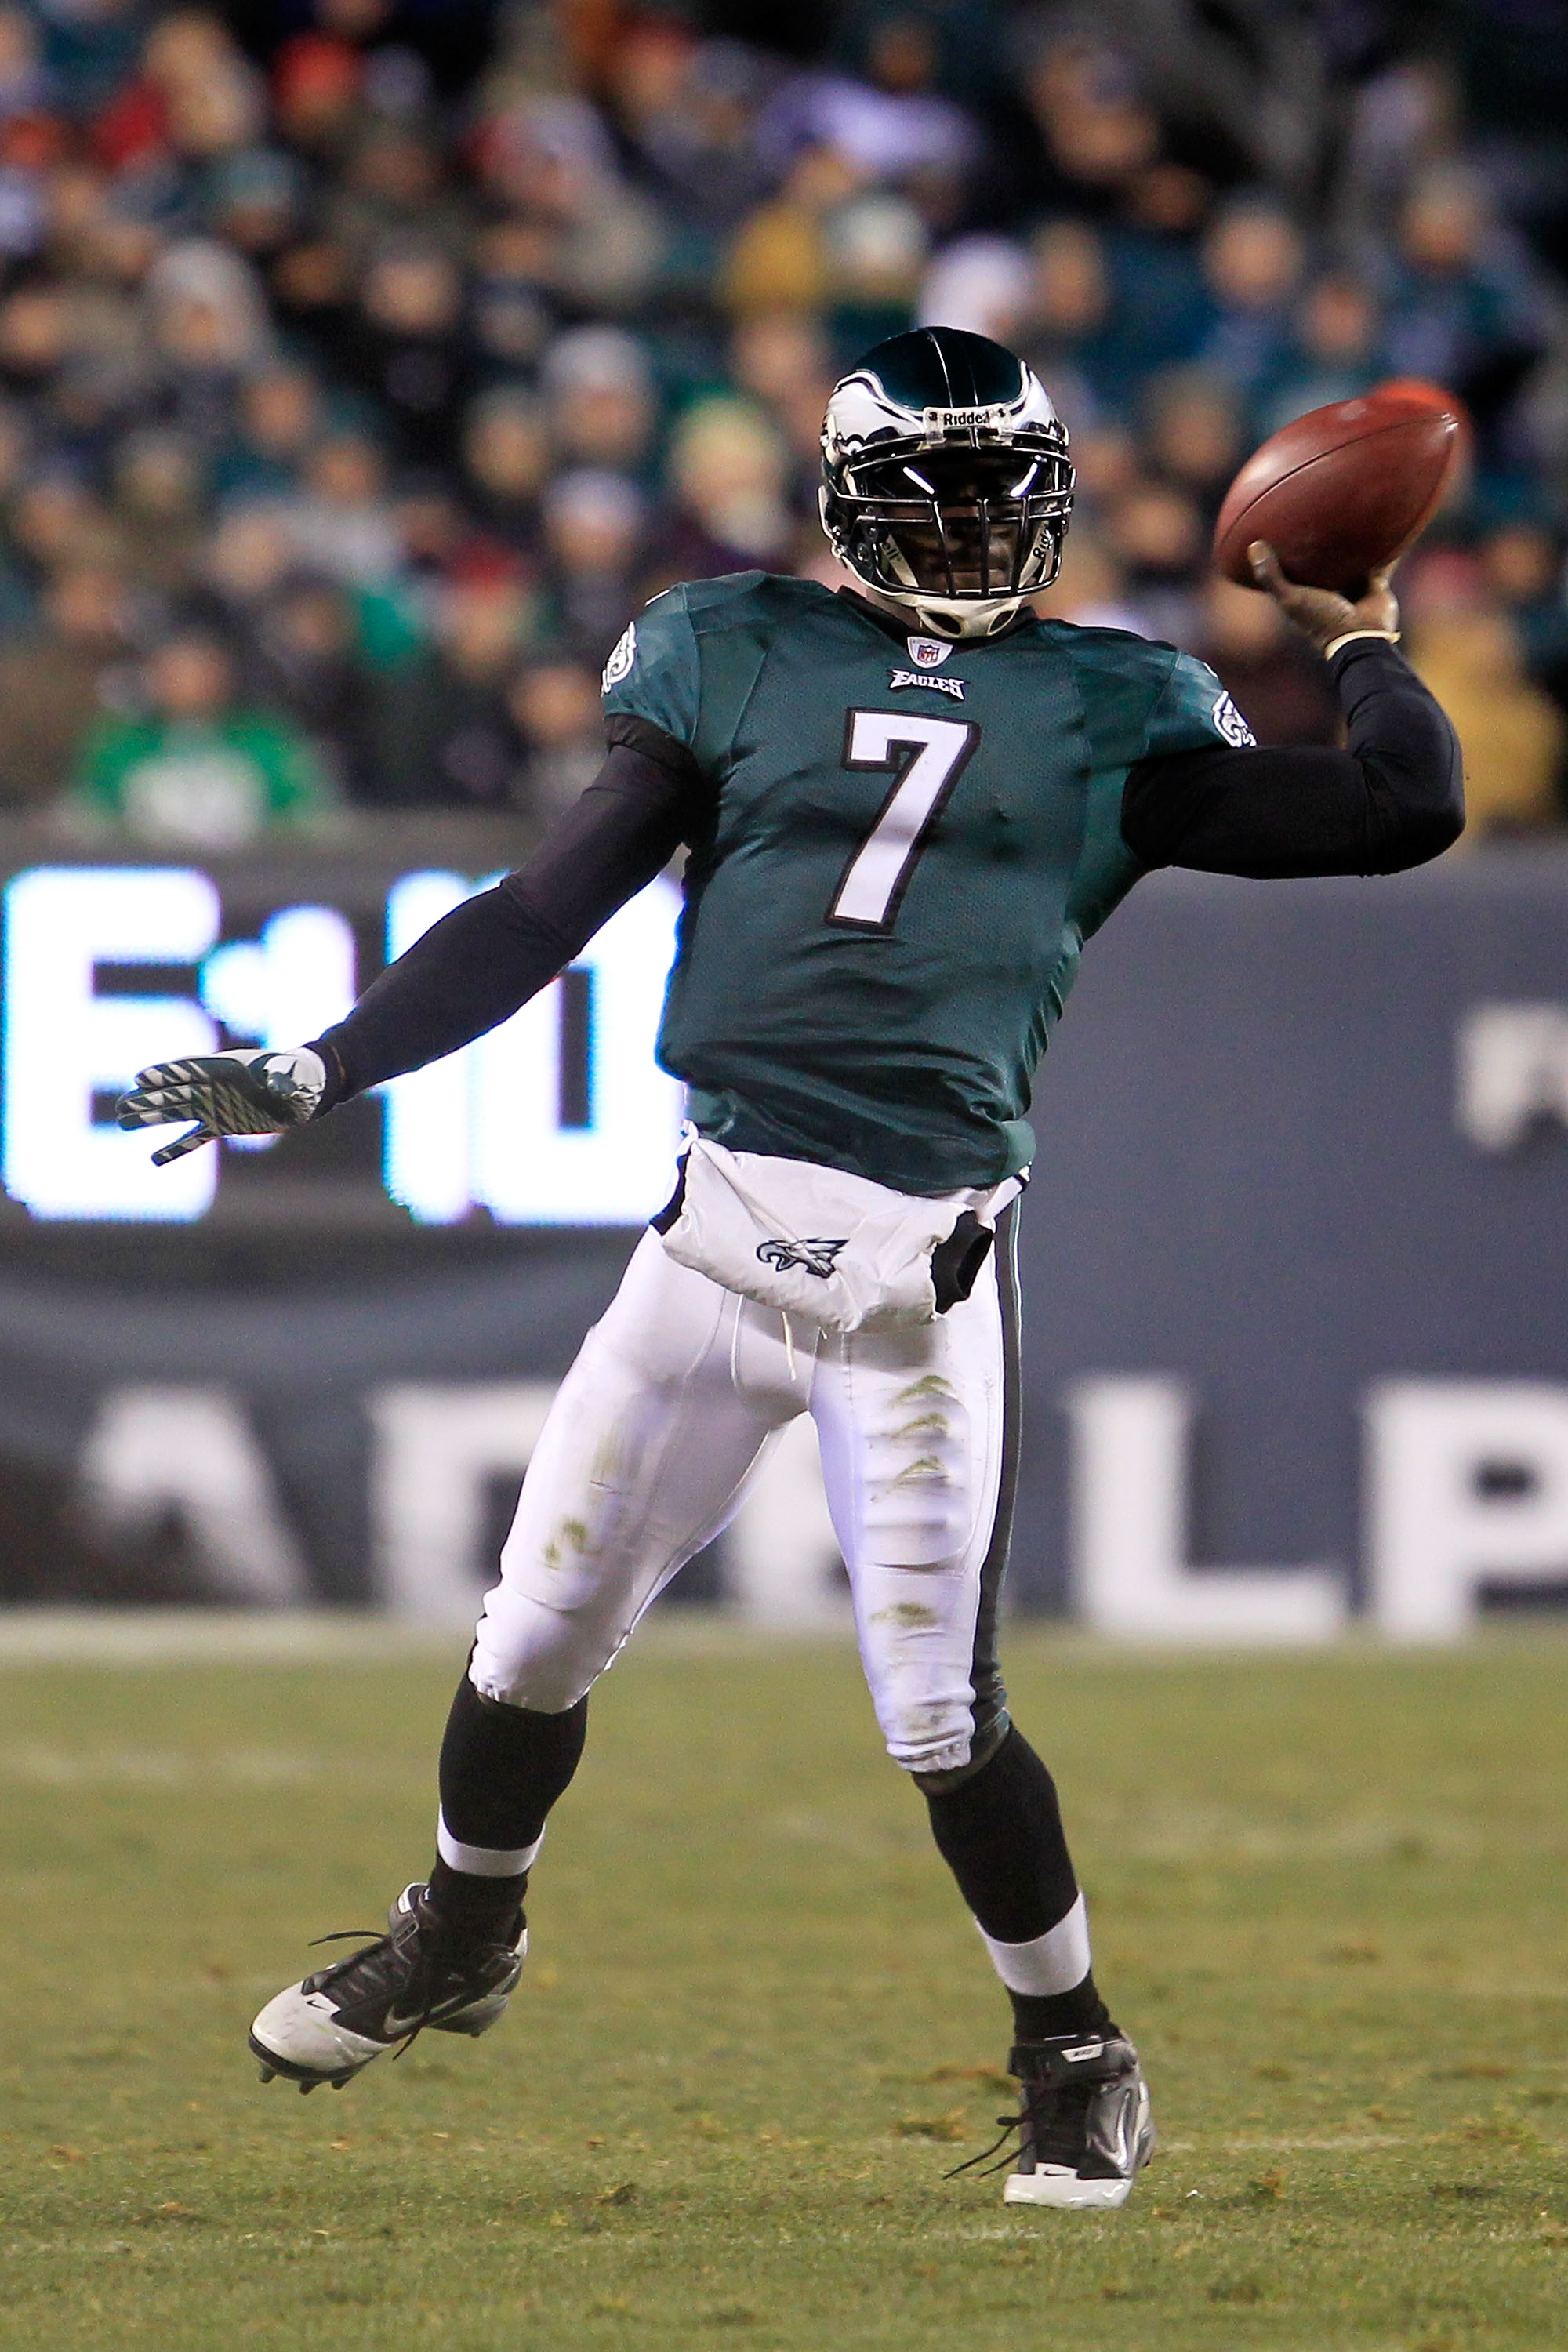 PHILADELPHIA, PA - JANUARY 09:  Michael Vick #7 of the Philadelphia Eagles scrambles against the Green Bay Packers during the 2011 NFC wild card playoff game at Lincoln Financial Field on January 9, 2011 in Philadelphia, Pennsylvania.  (Photo by Chris Tro